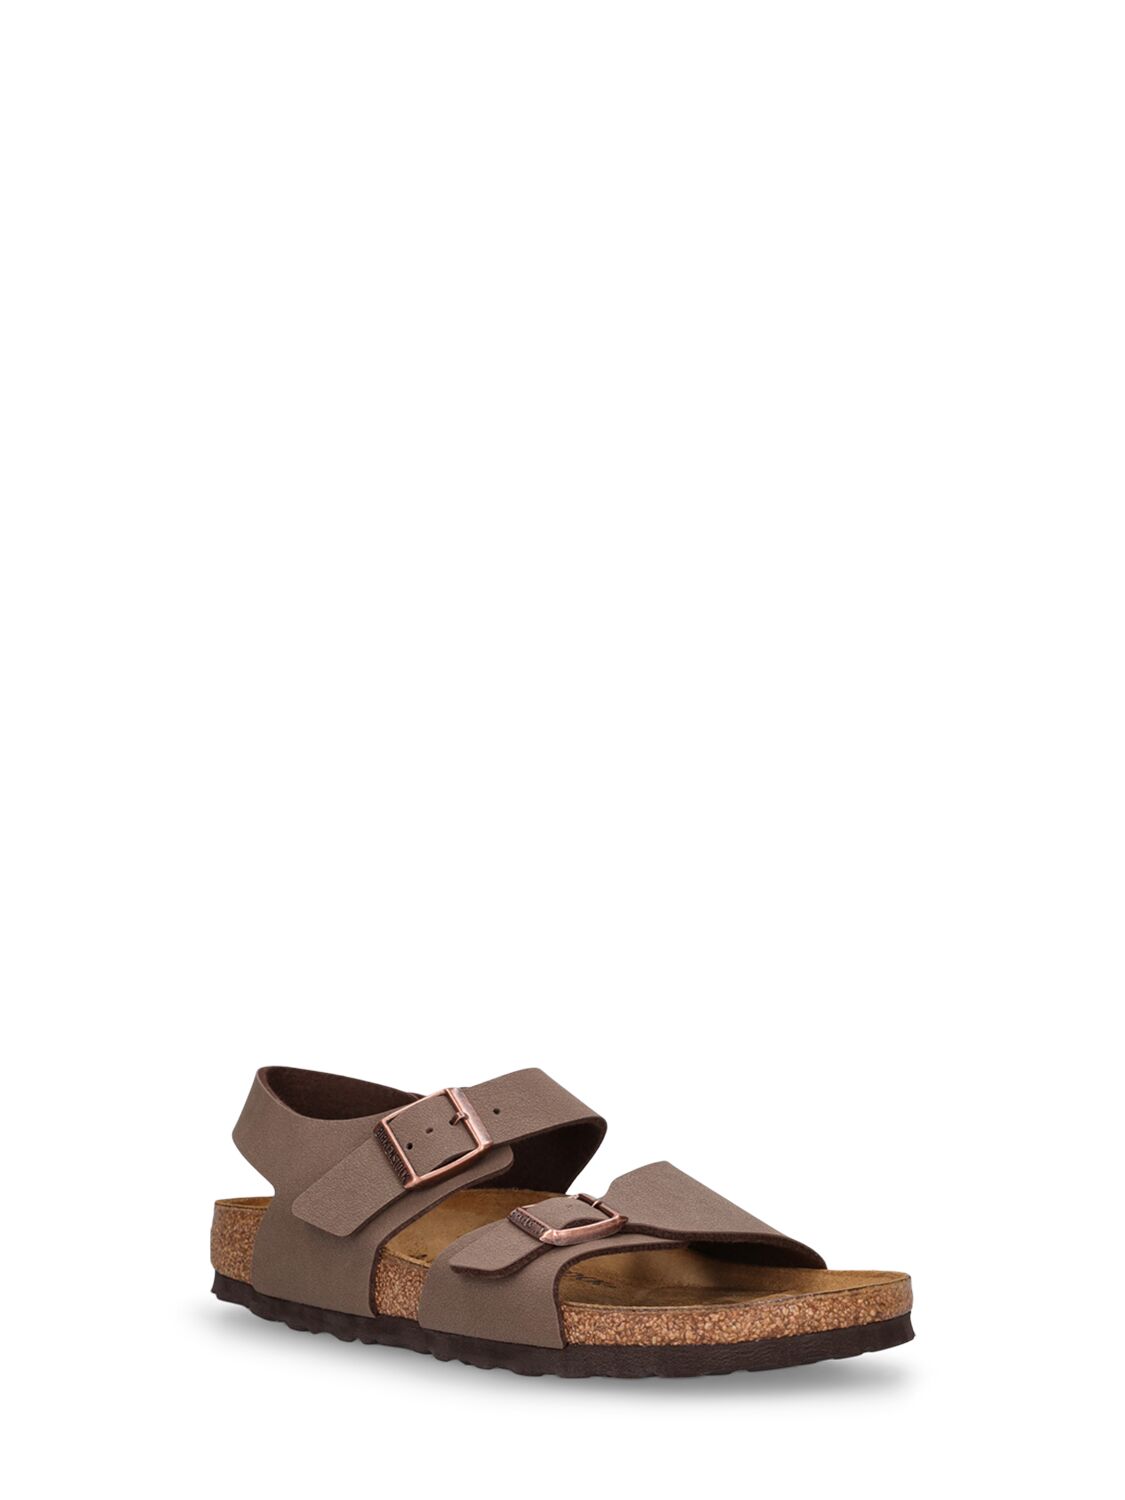 Shop Birkenstock New York Faux Leather Sandals In Brown